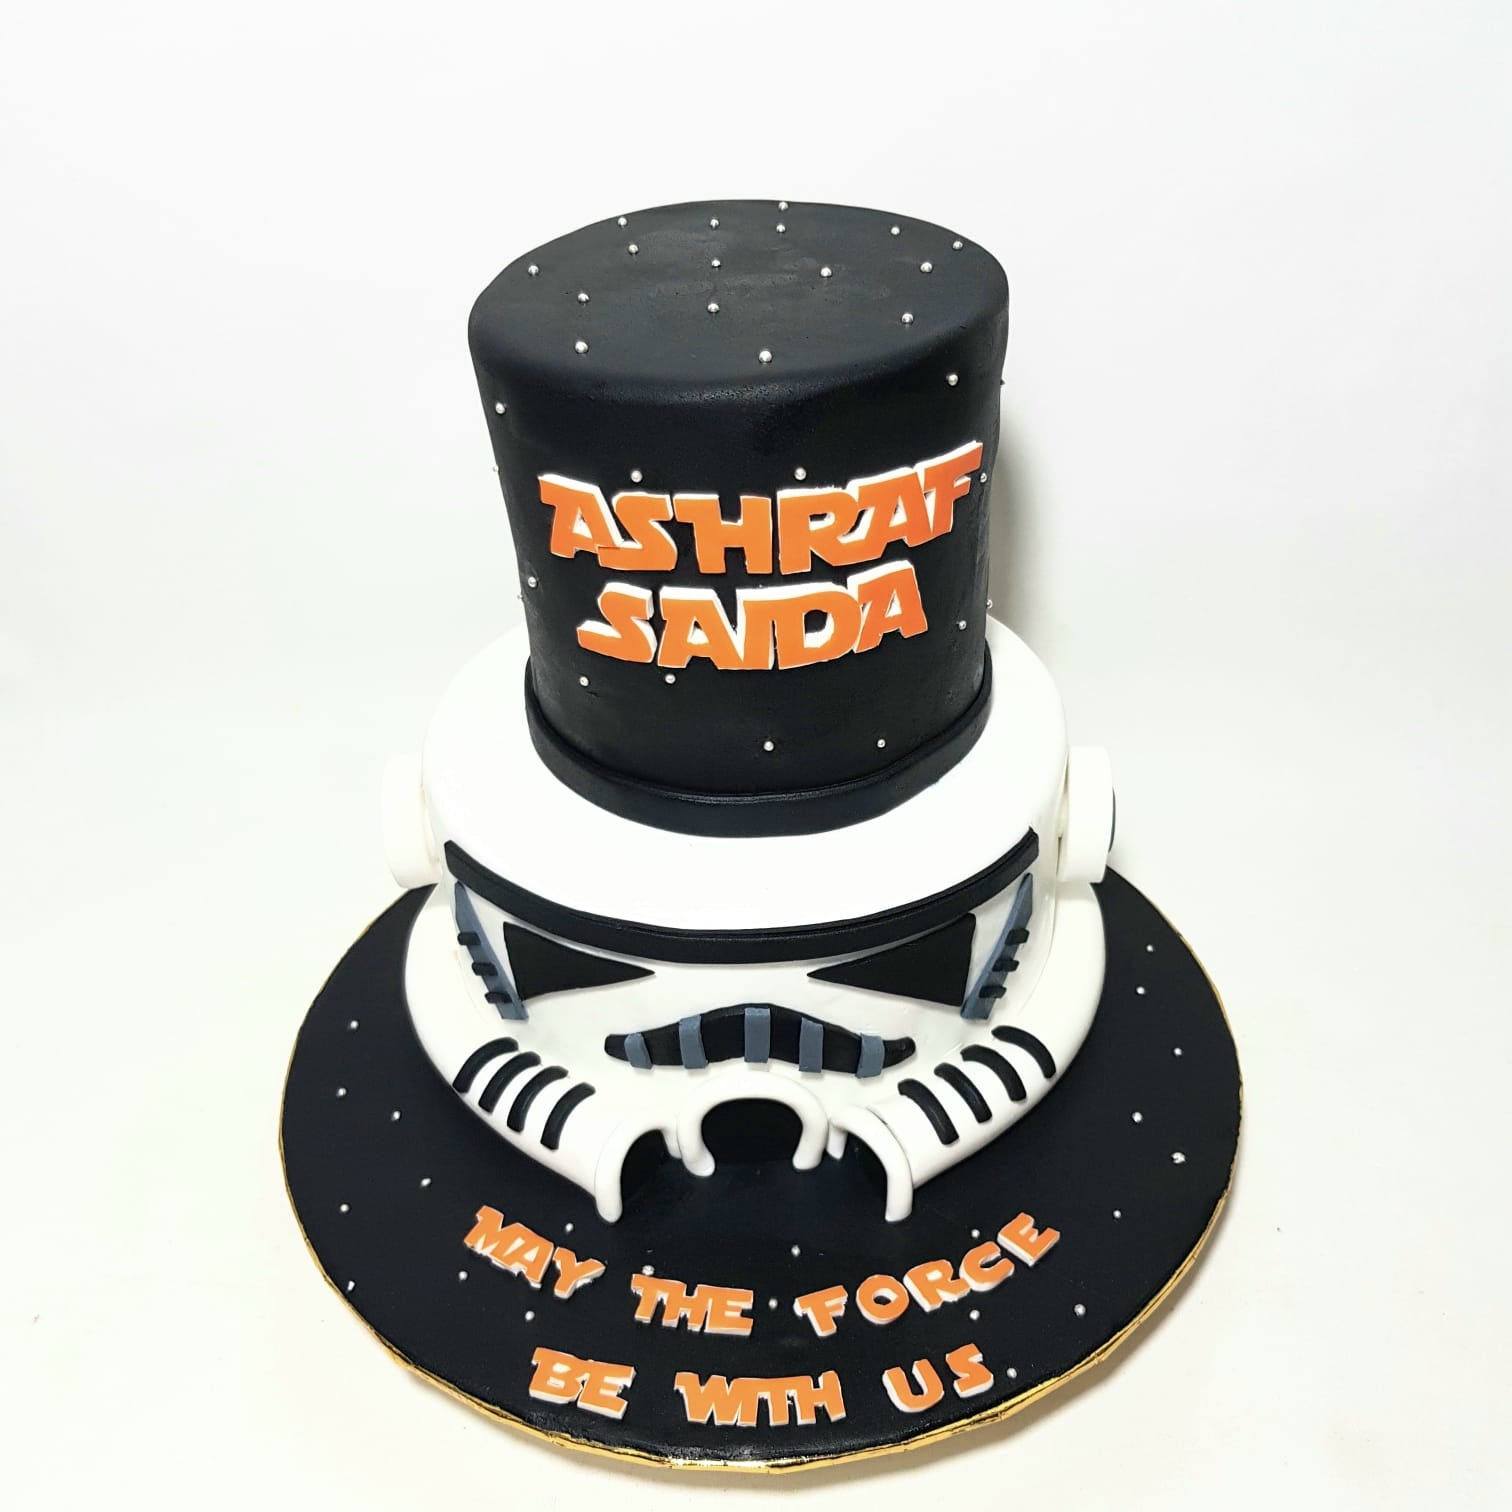 Pin on Sooperlicious Cakes